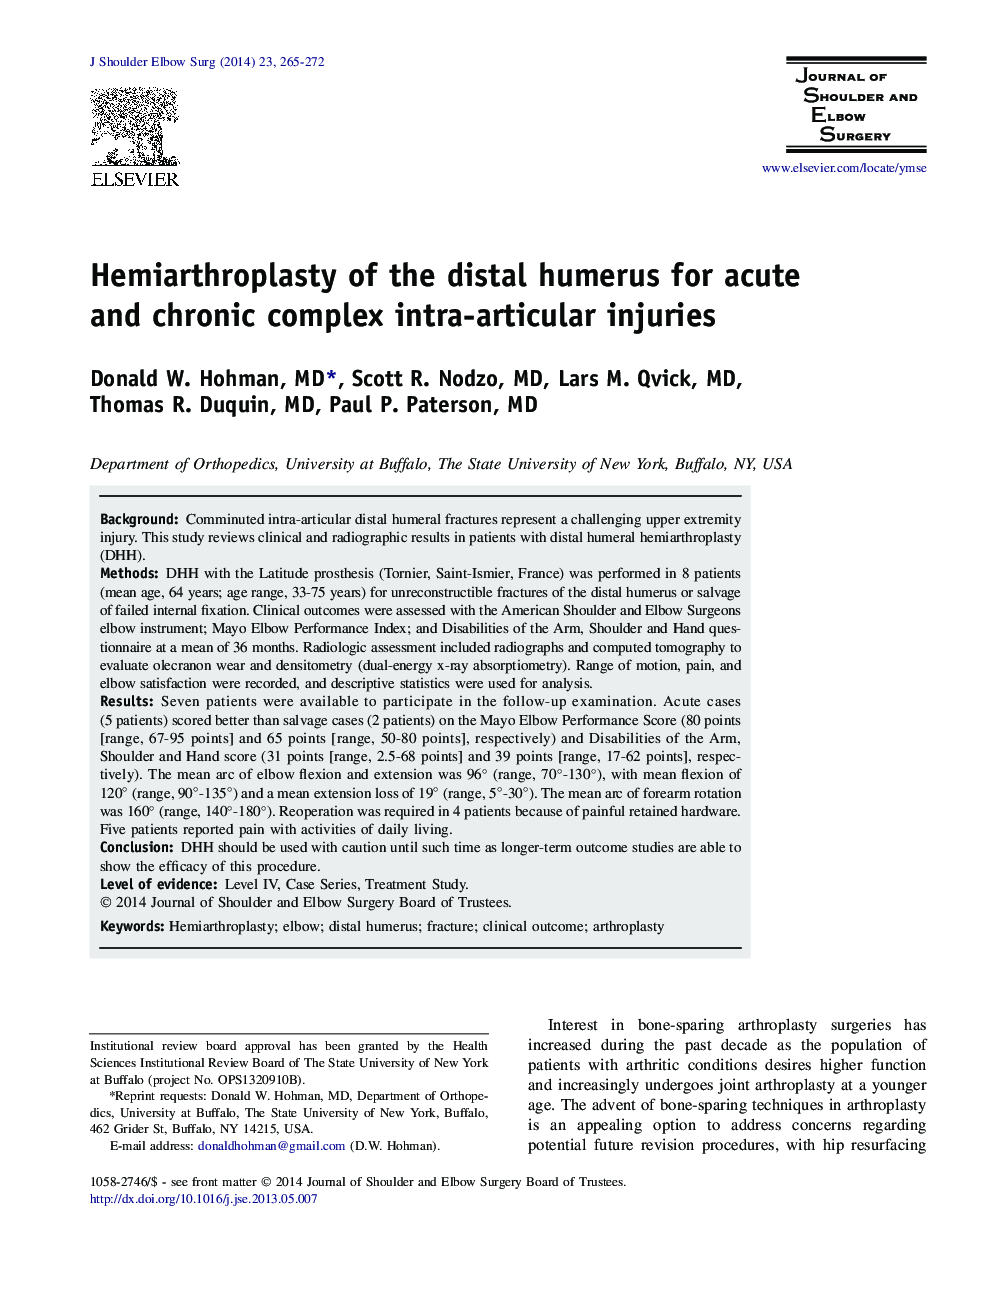 Hemiarthroplasty of the distal humerus for acute and chronic complex intra-articular injuries 